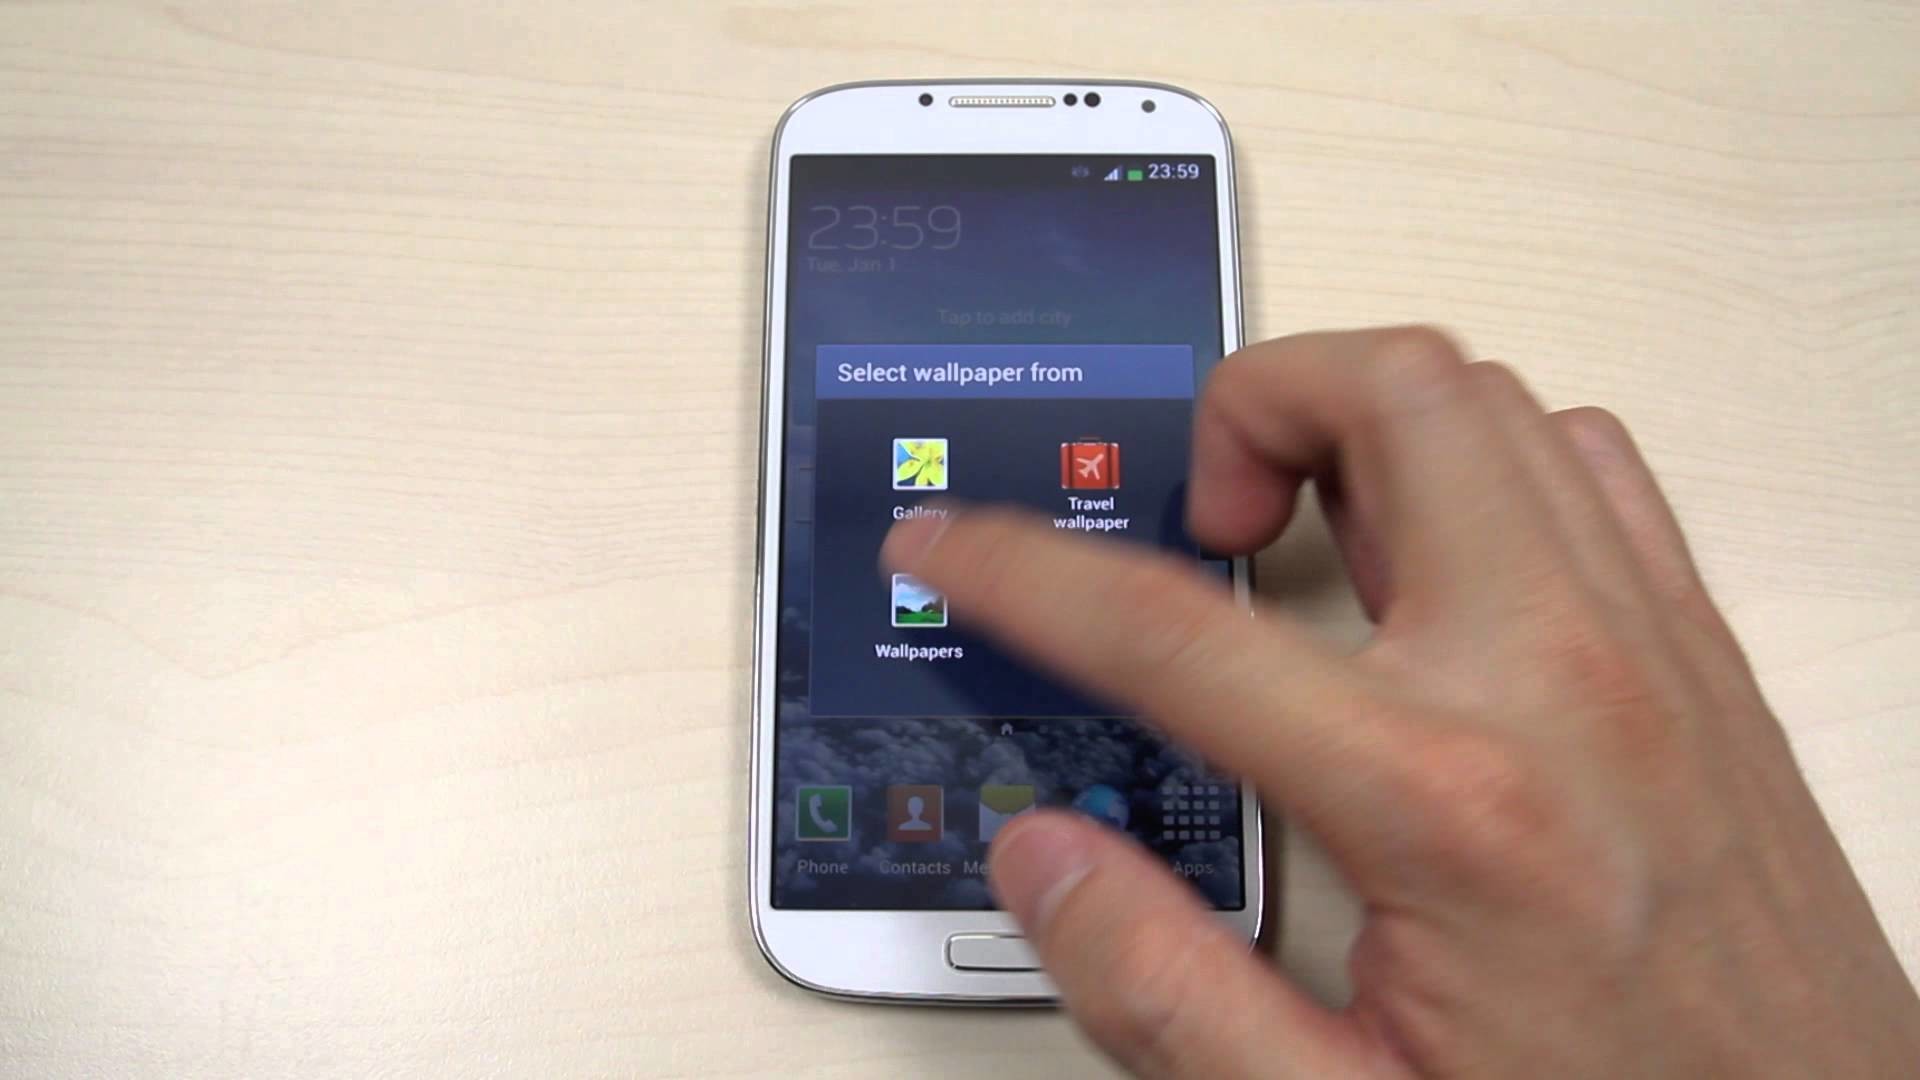 1920x1080 How to change the home screen and lock screen wallpaper on Samsung Galaxy  S4 GT-I9500 / GT-I9505 - YouTube